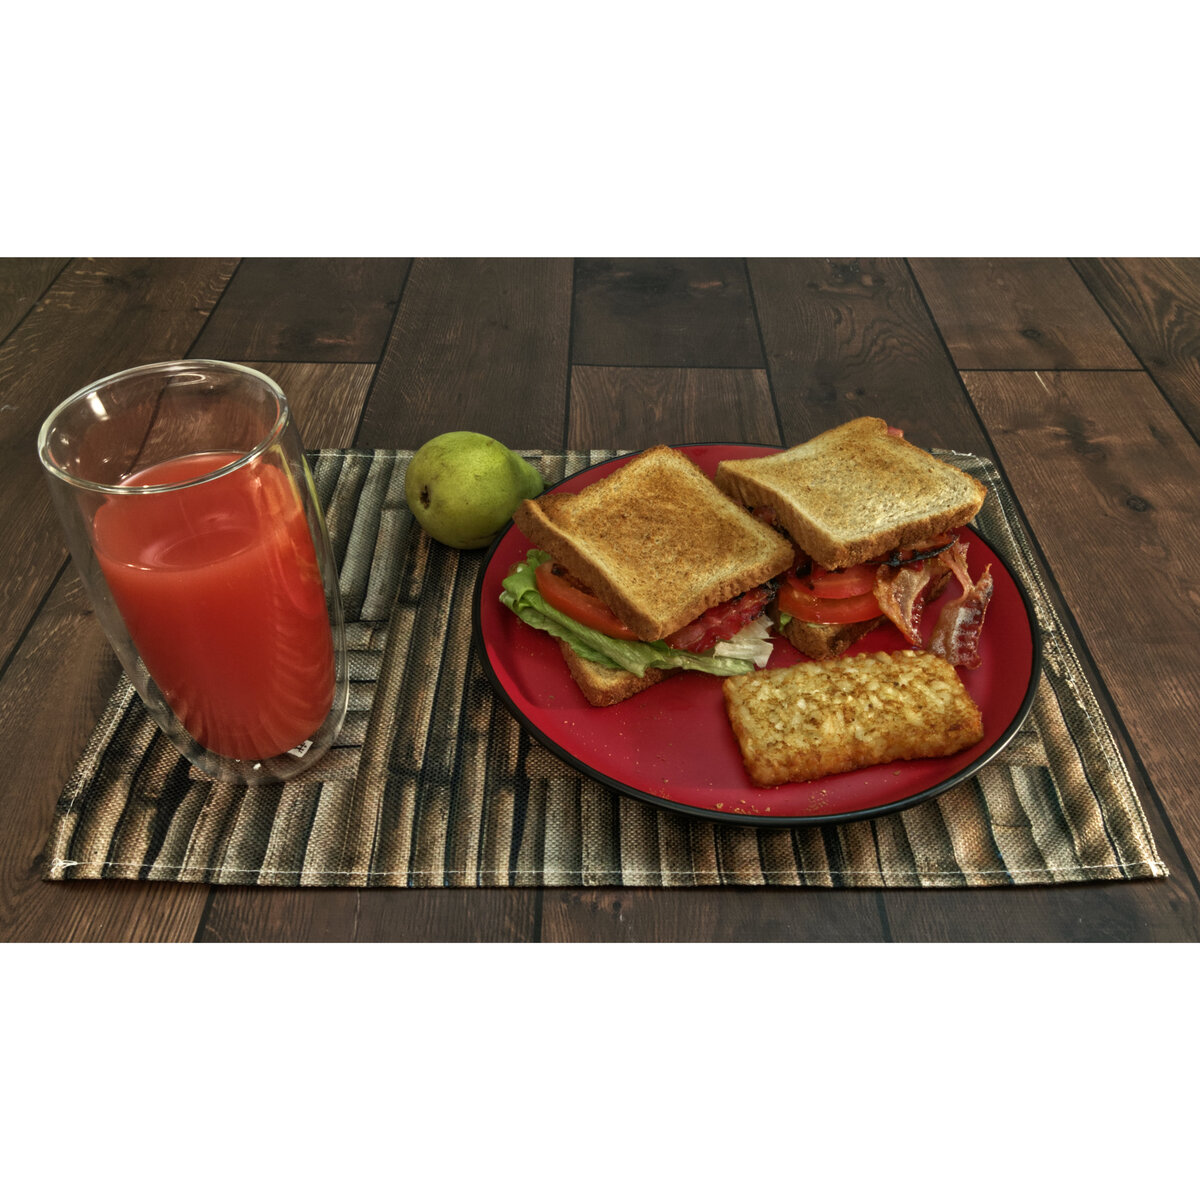 Bacon, Lettuce and Tomato Sandwiches with a Hash Brown Patty, a Pear and Grapefruit Juice